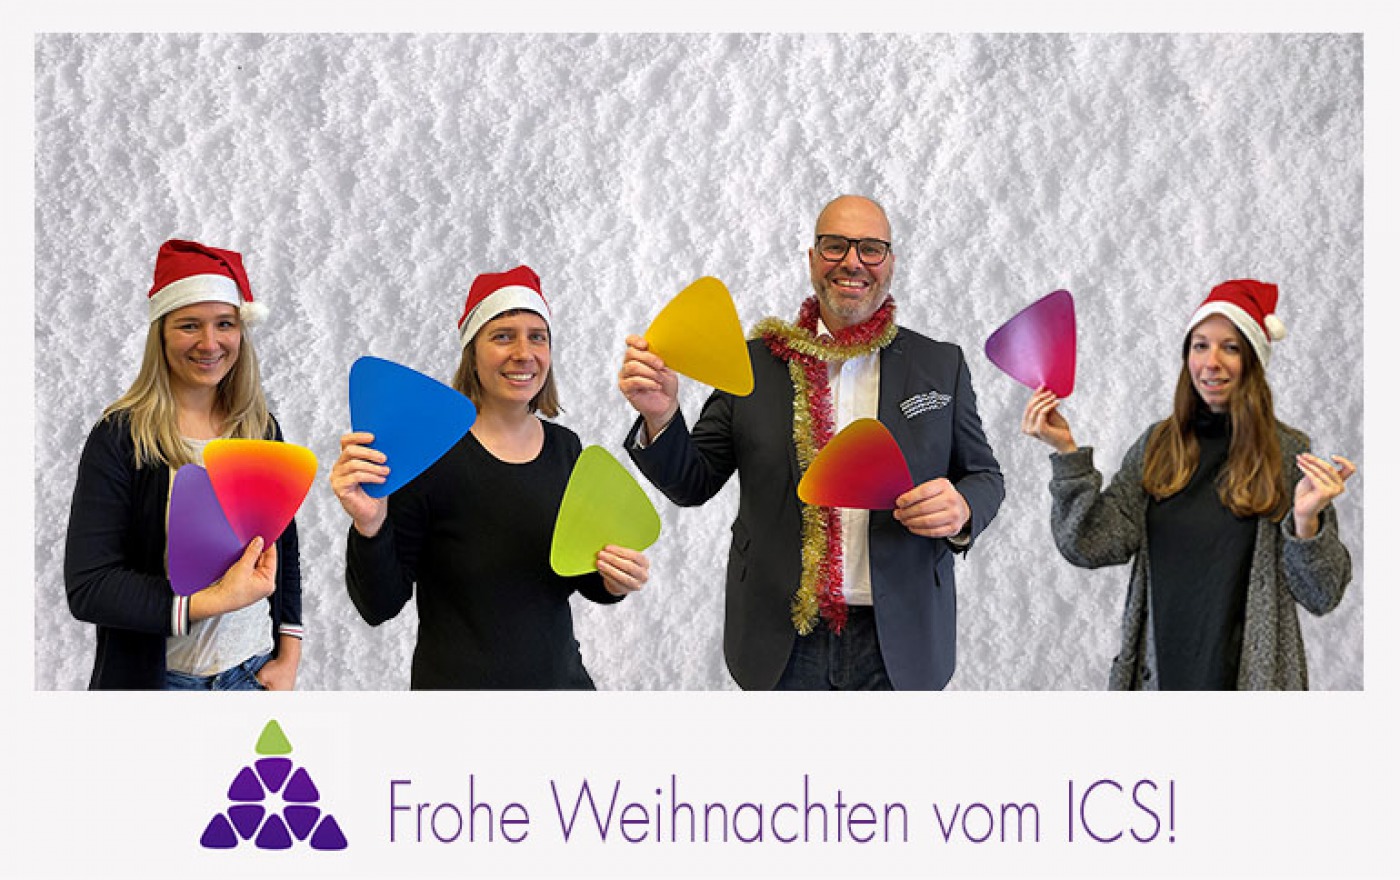 We wish you a merry ICS-mas and a happy new year!